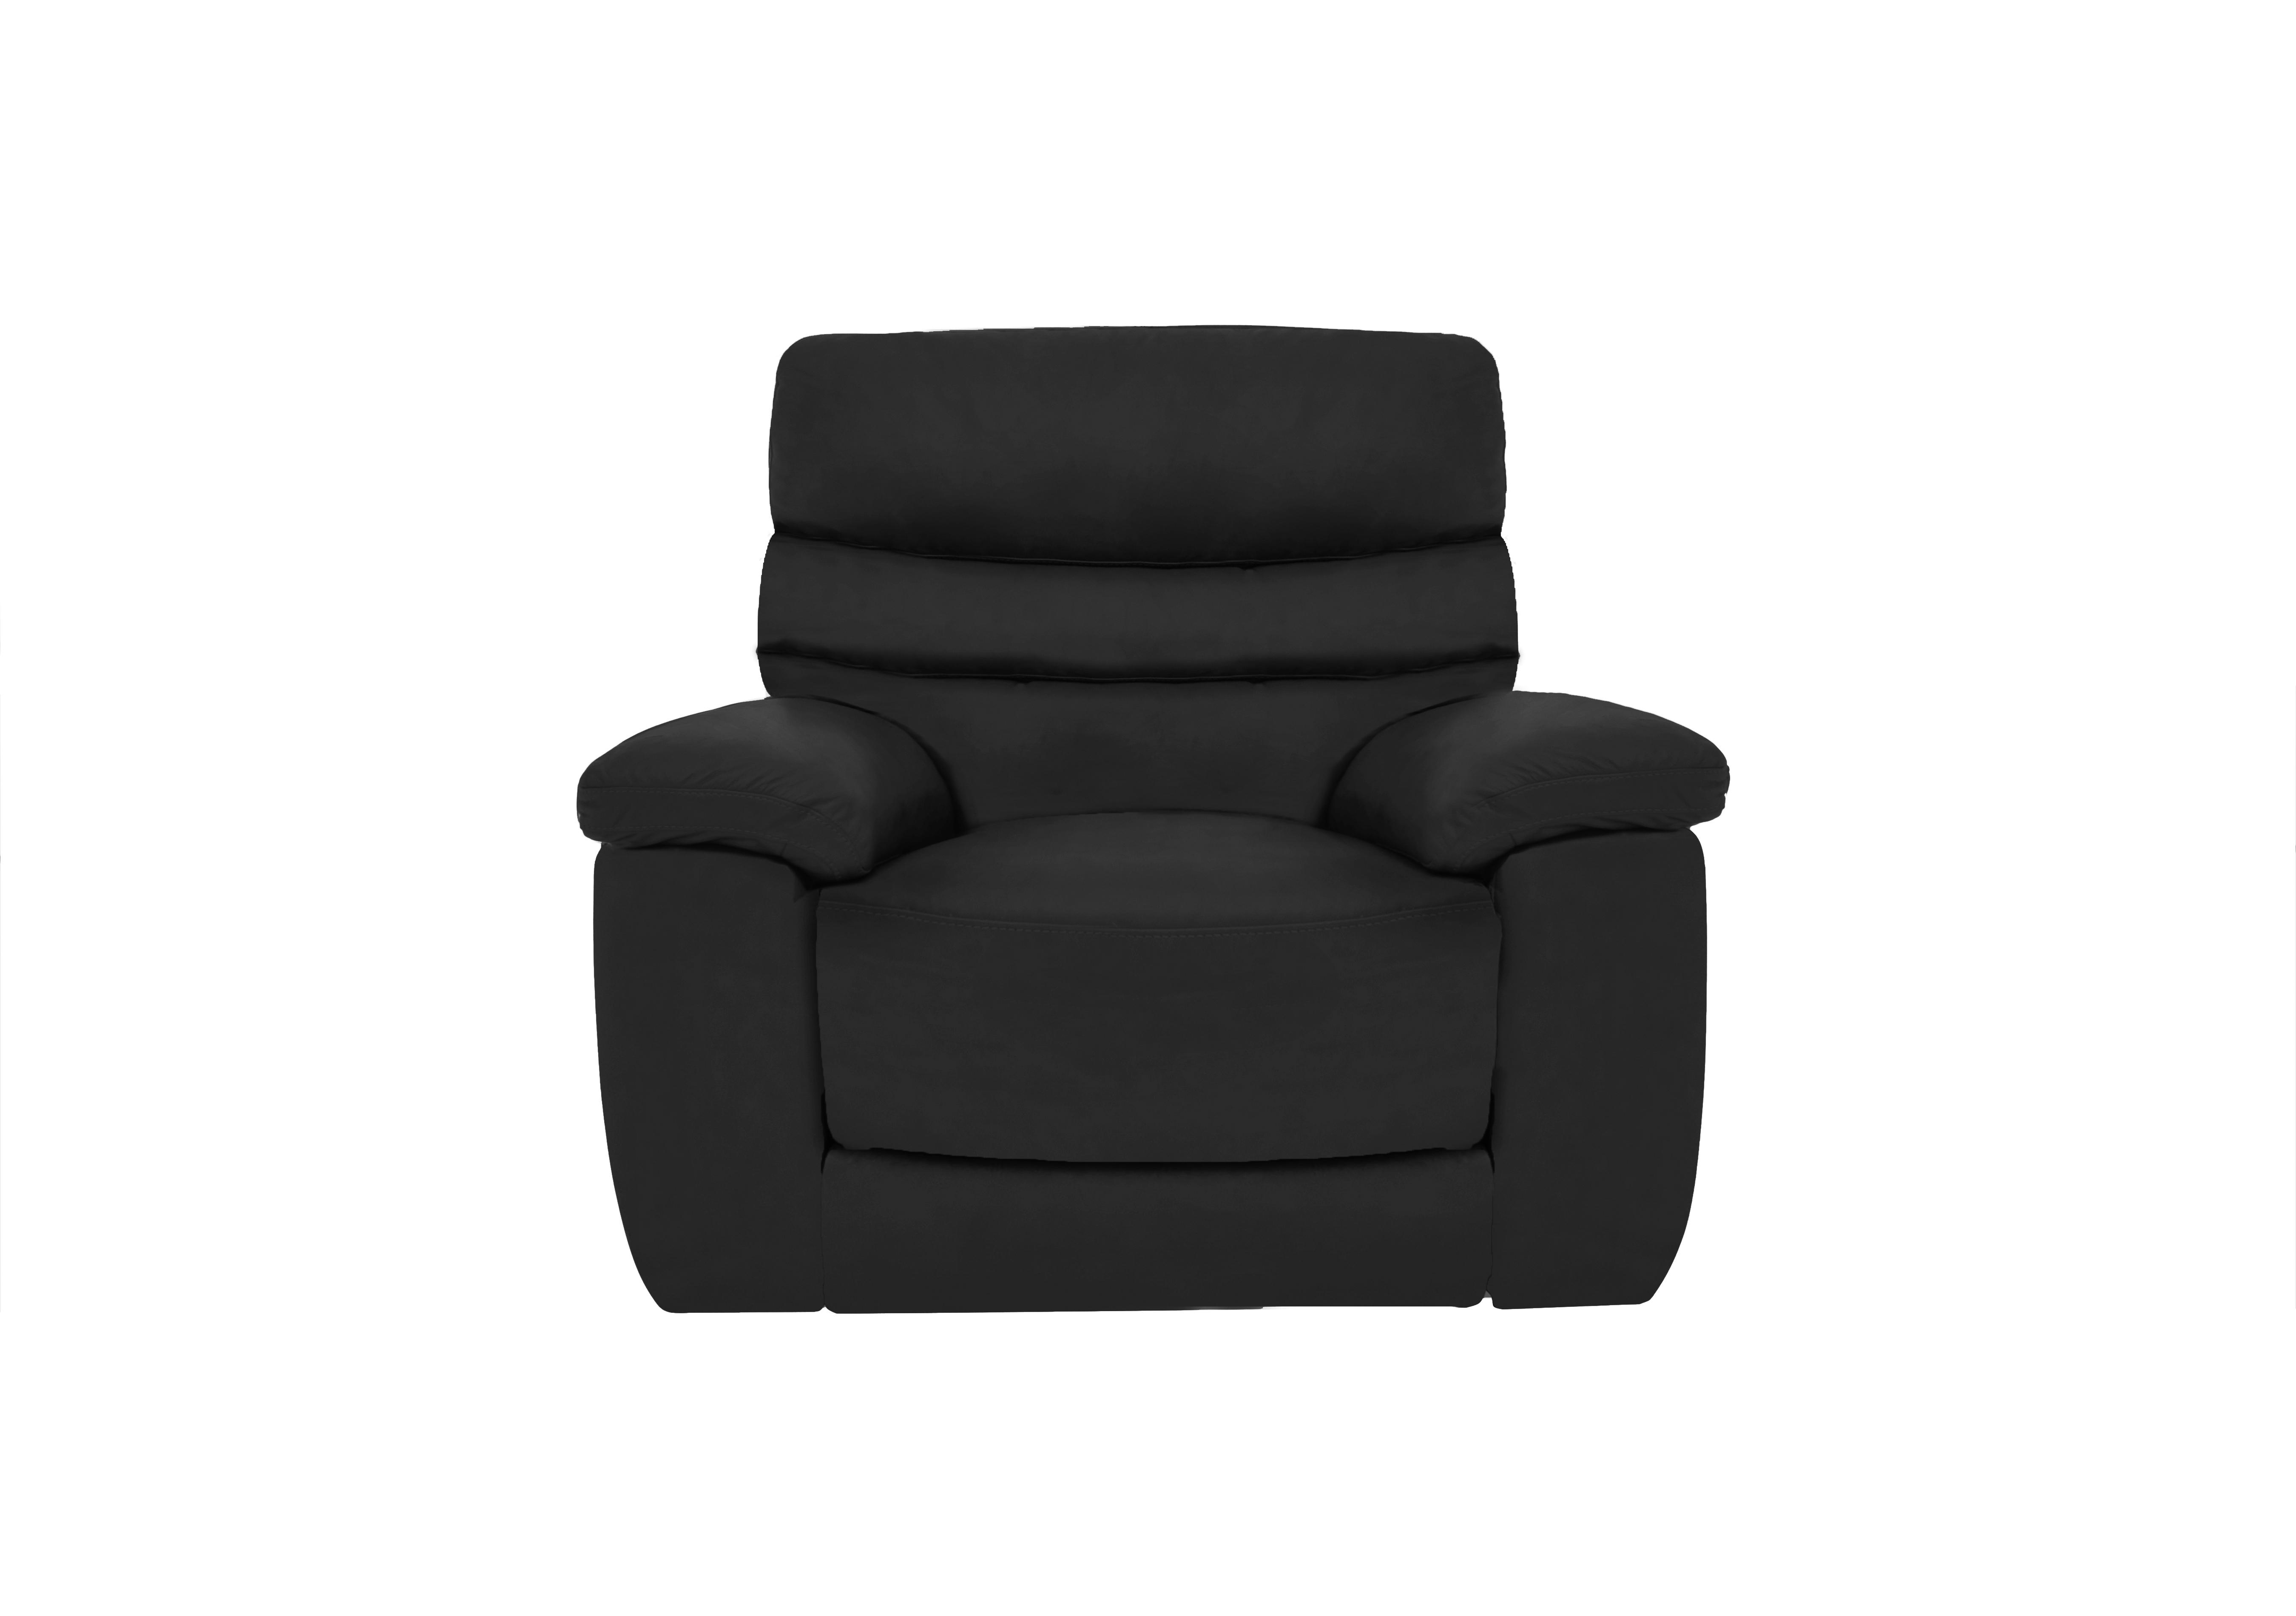 Nimbus Leather Power Recliner Chair with Power Headrest and Power Lumbar in Bx-023c Black on Furniture Village